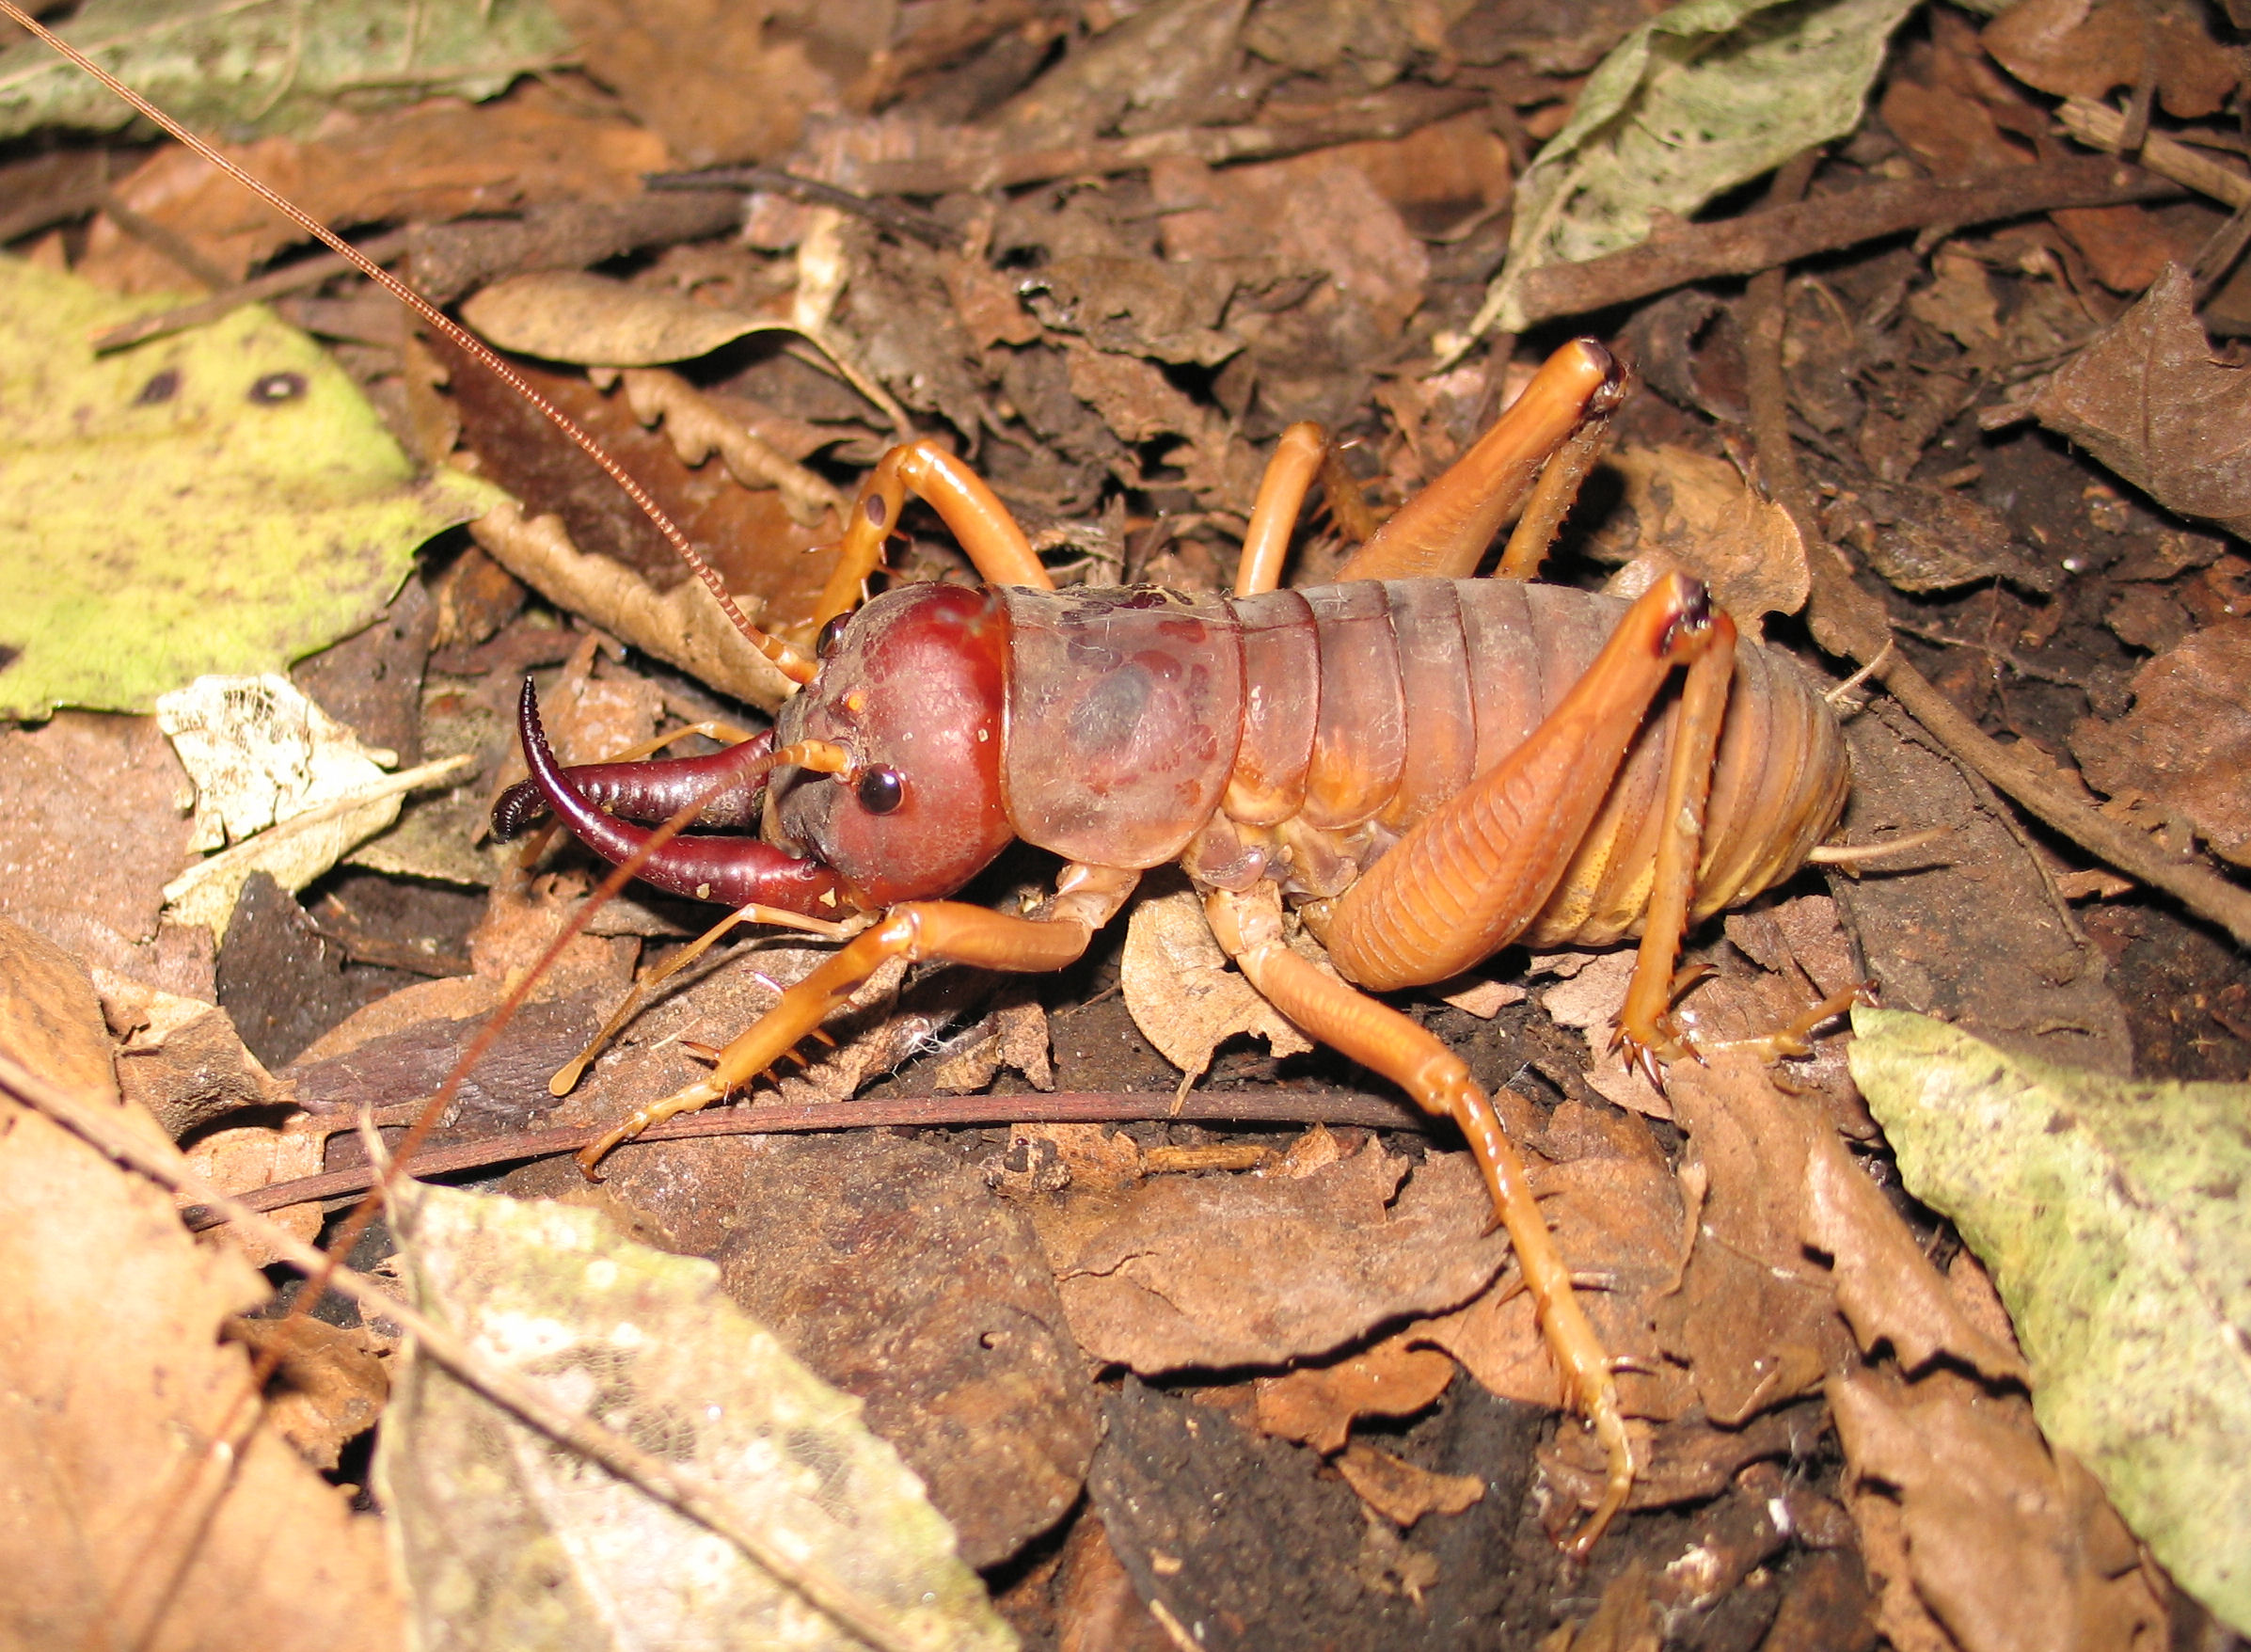 Weta: giant insects from New Zealand